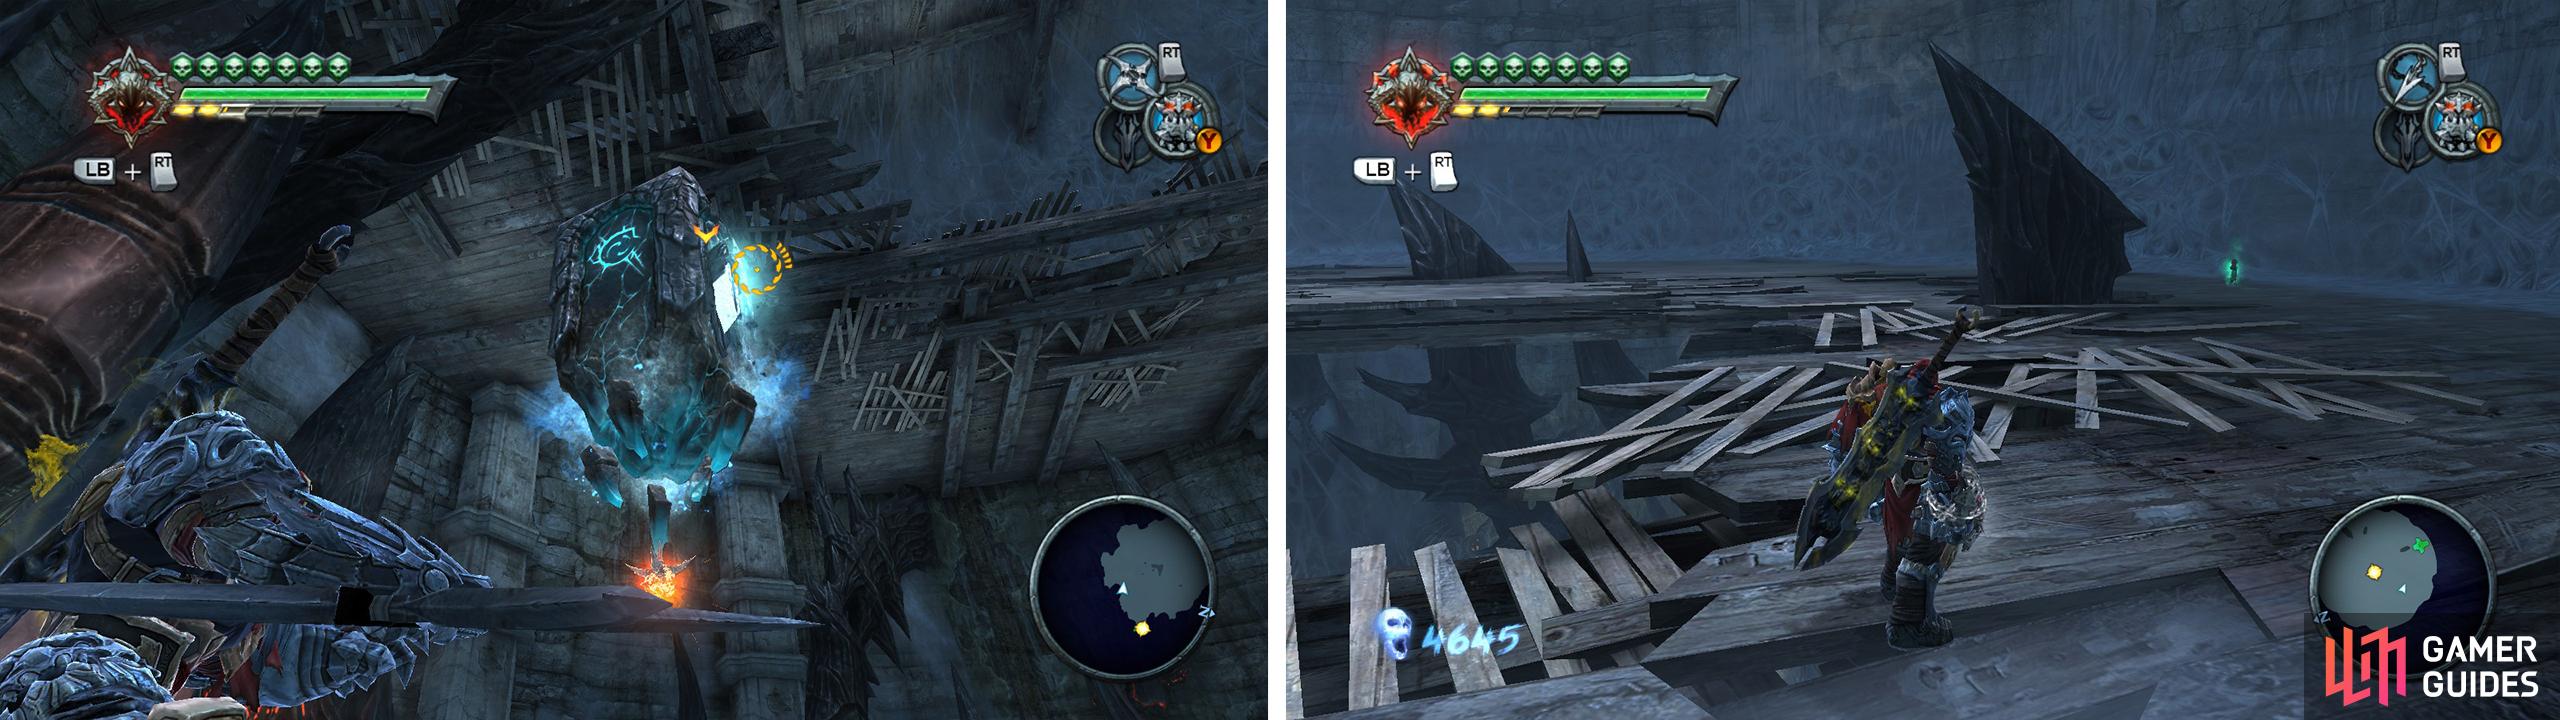 Use the lift (left) to return above the boss area. Look behind some rocks for an Artefact (right).